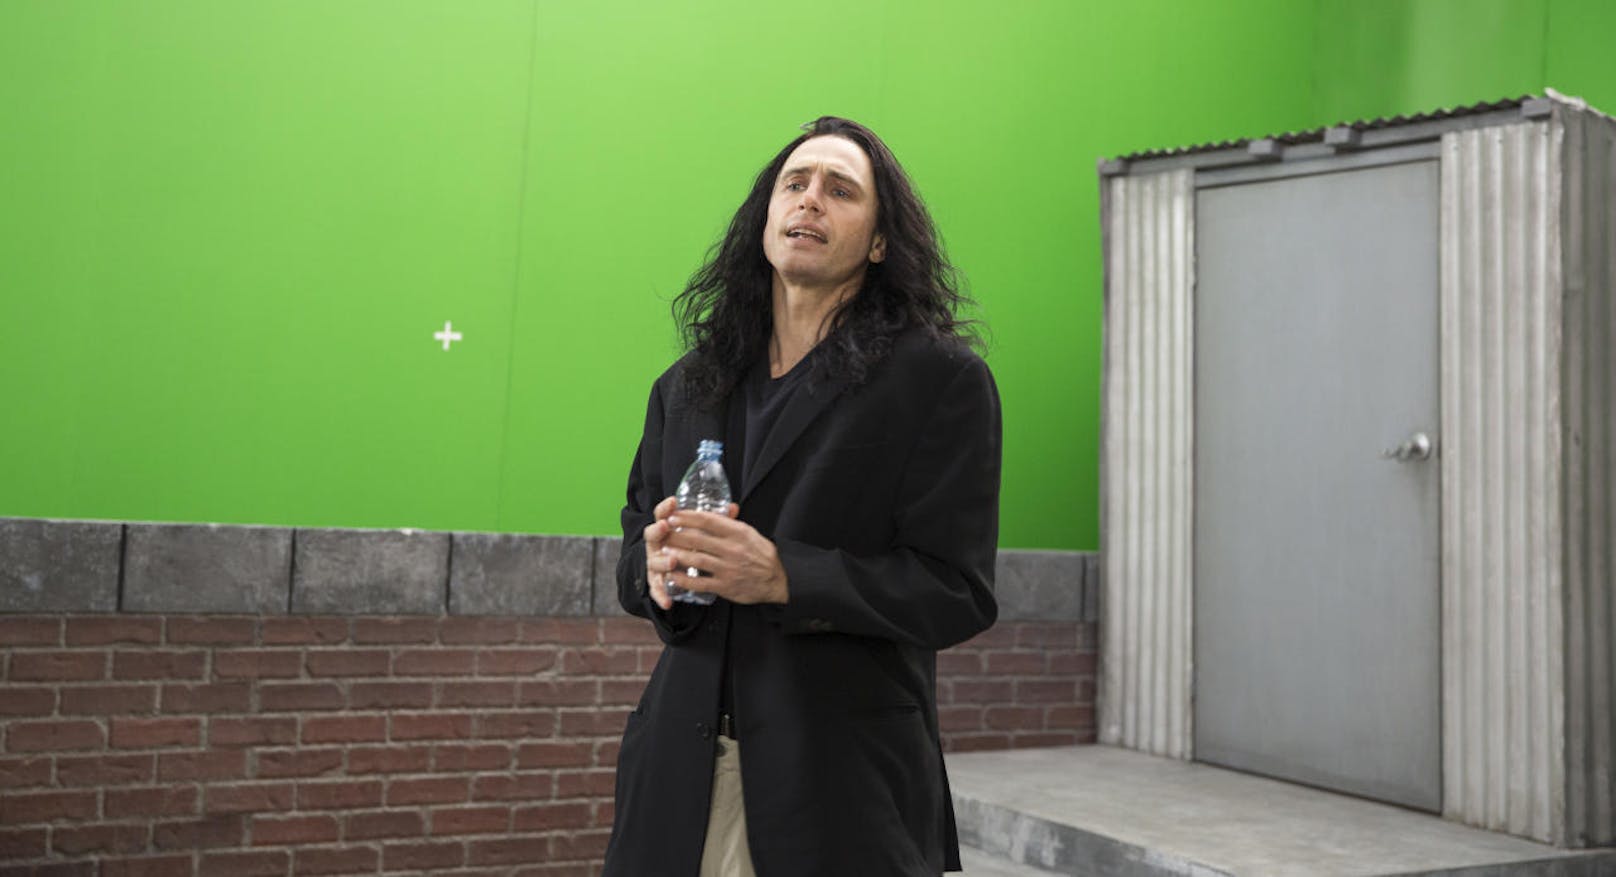 James Franco als Tommy Wiseau in "The Disaster Artist". 